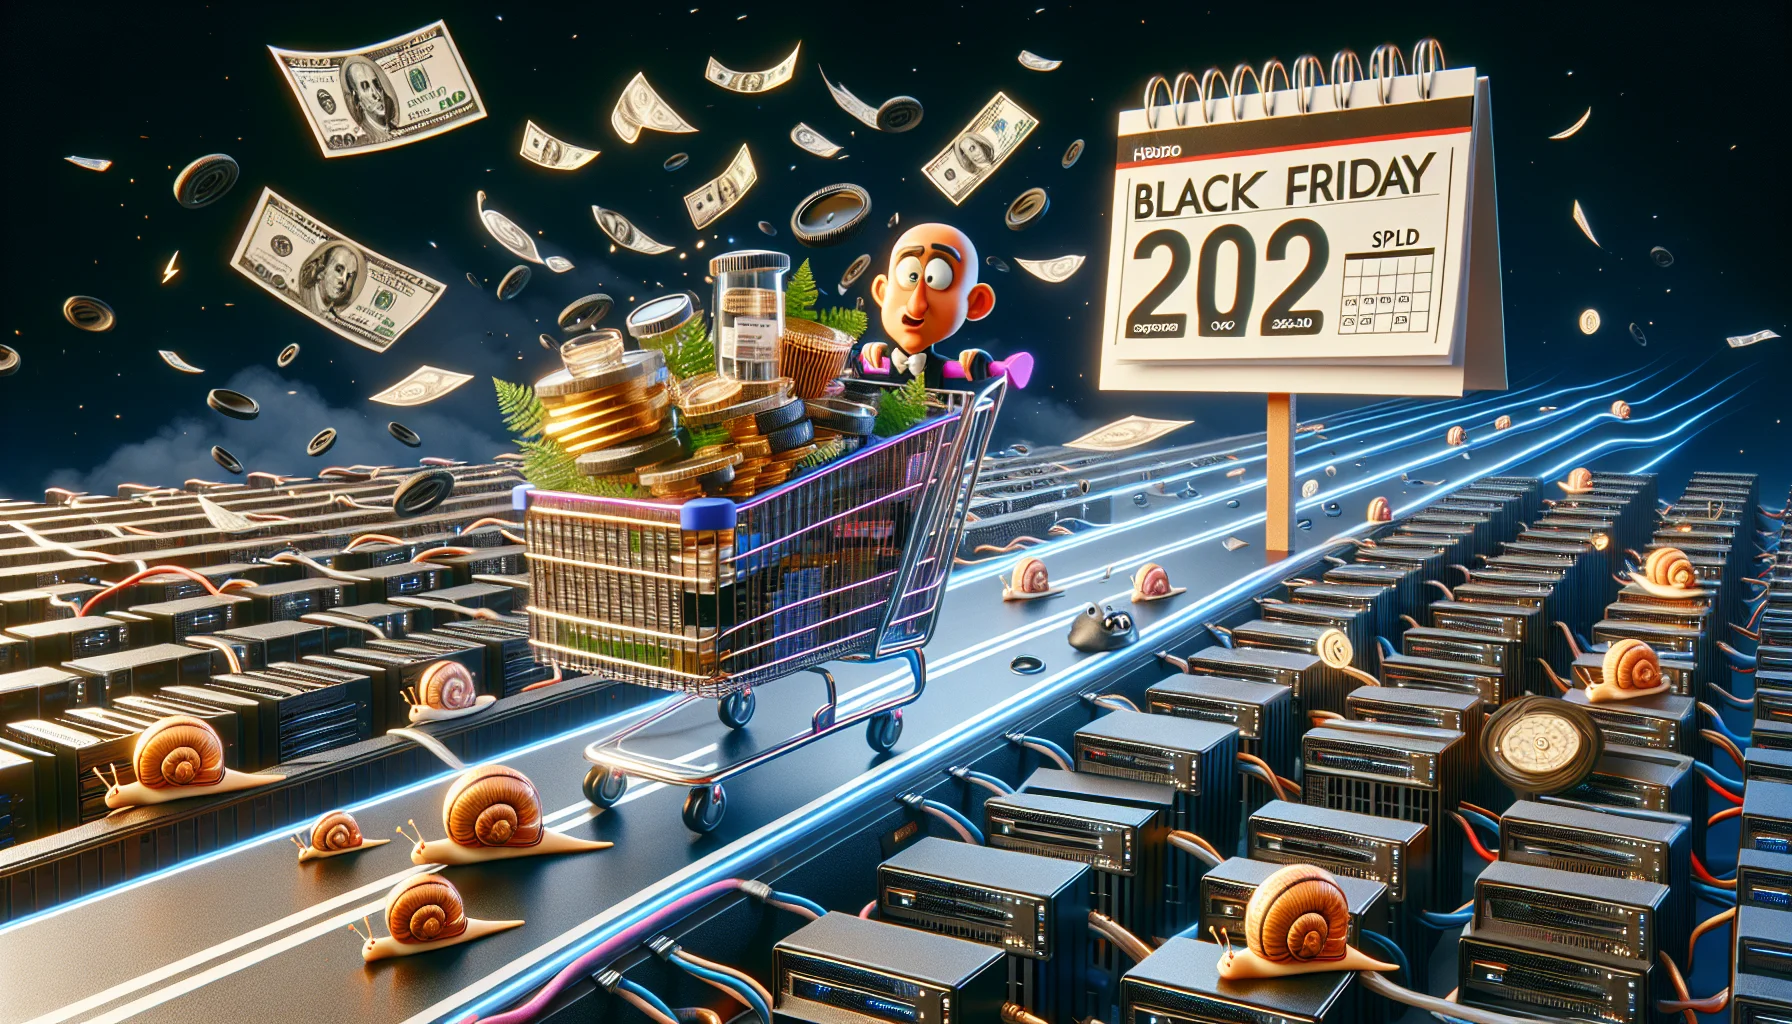 Create a humorous, realistic scenario representing enticing web hosting promotions during Black Friday 2020, without any specific company name. Imagine a shopping cart zooming through a maze of servers and computer cables, collecting glowing digital dollar savings, and evading obstacles like slow website snails. At the finishing line, there is a victorious banner reading 'unbelievable web hosting deals', with a 2020 calendar in the background highlighting Black Friday.